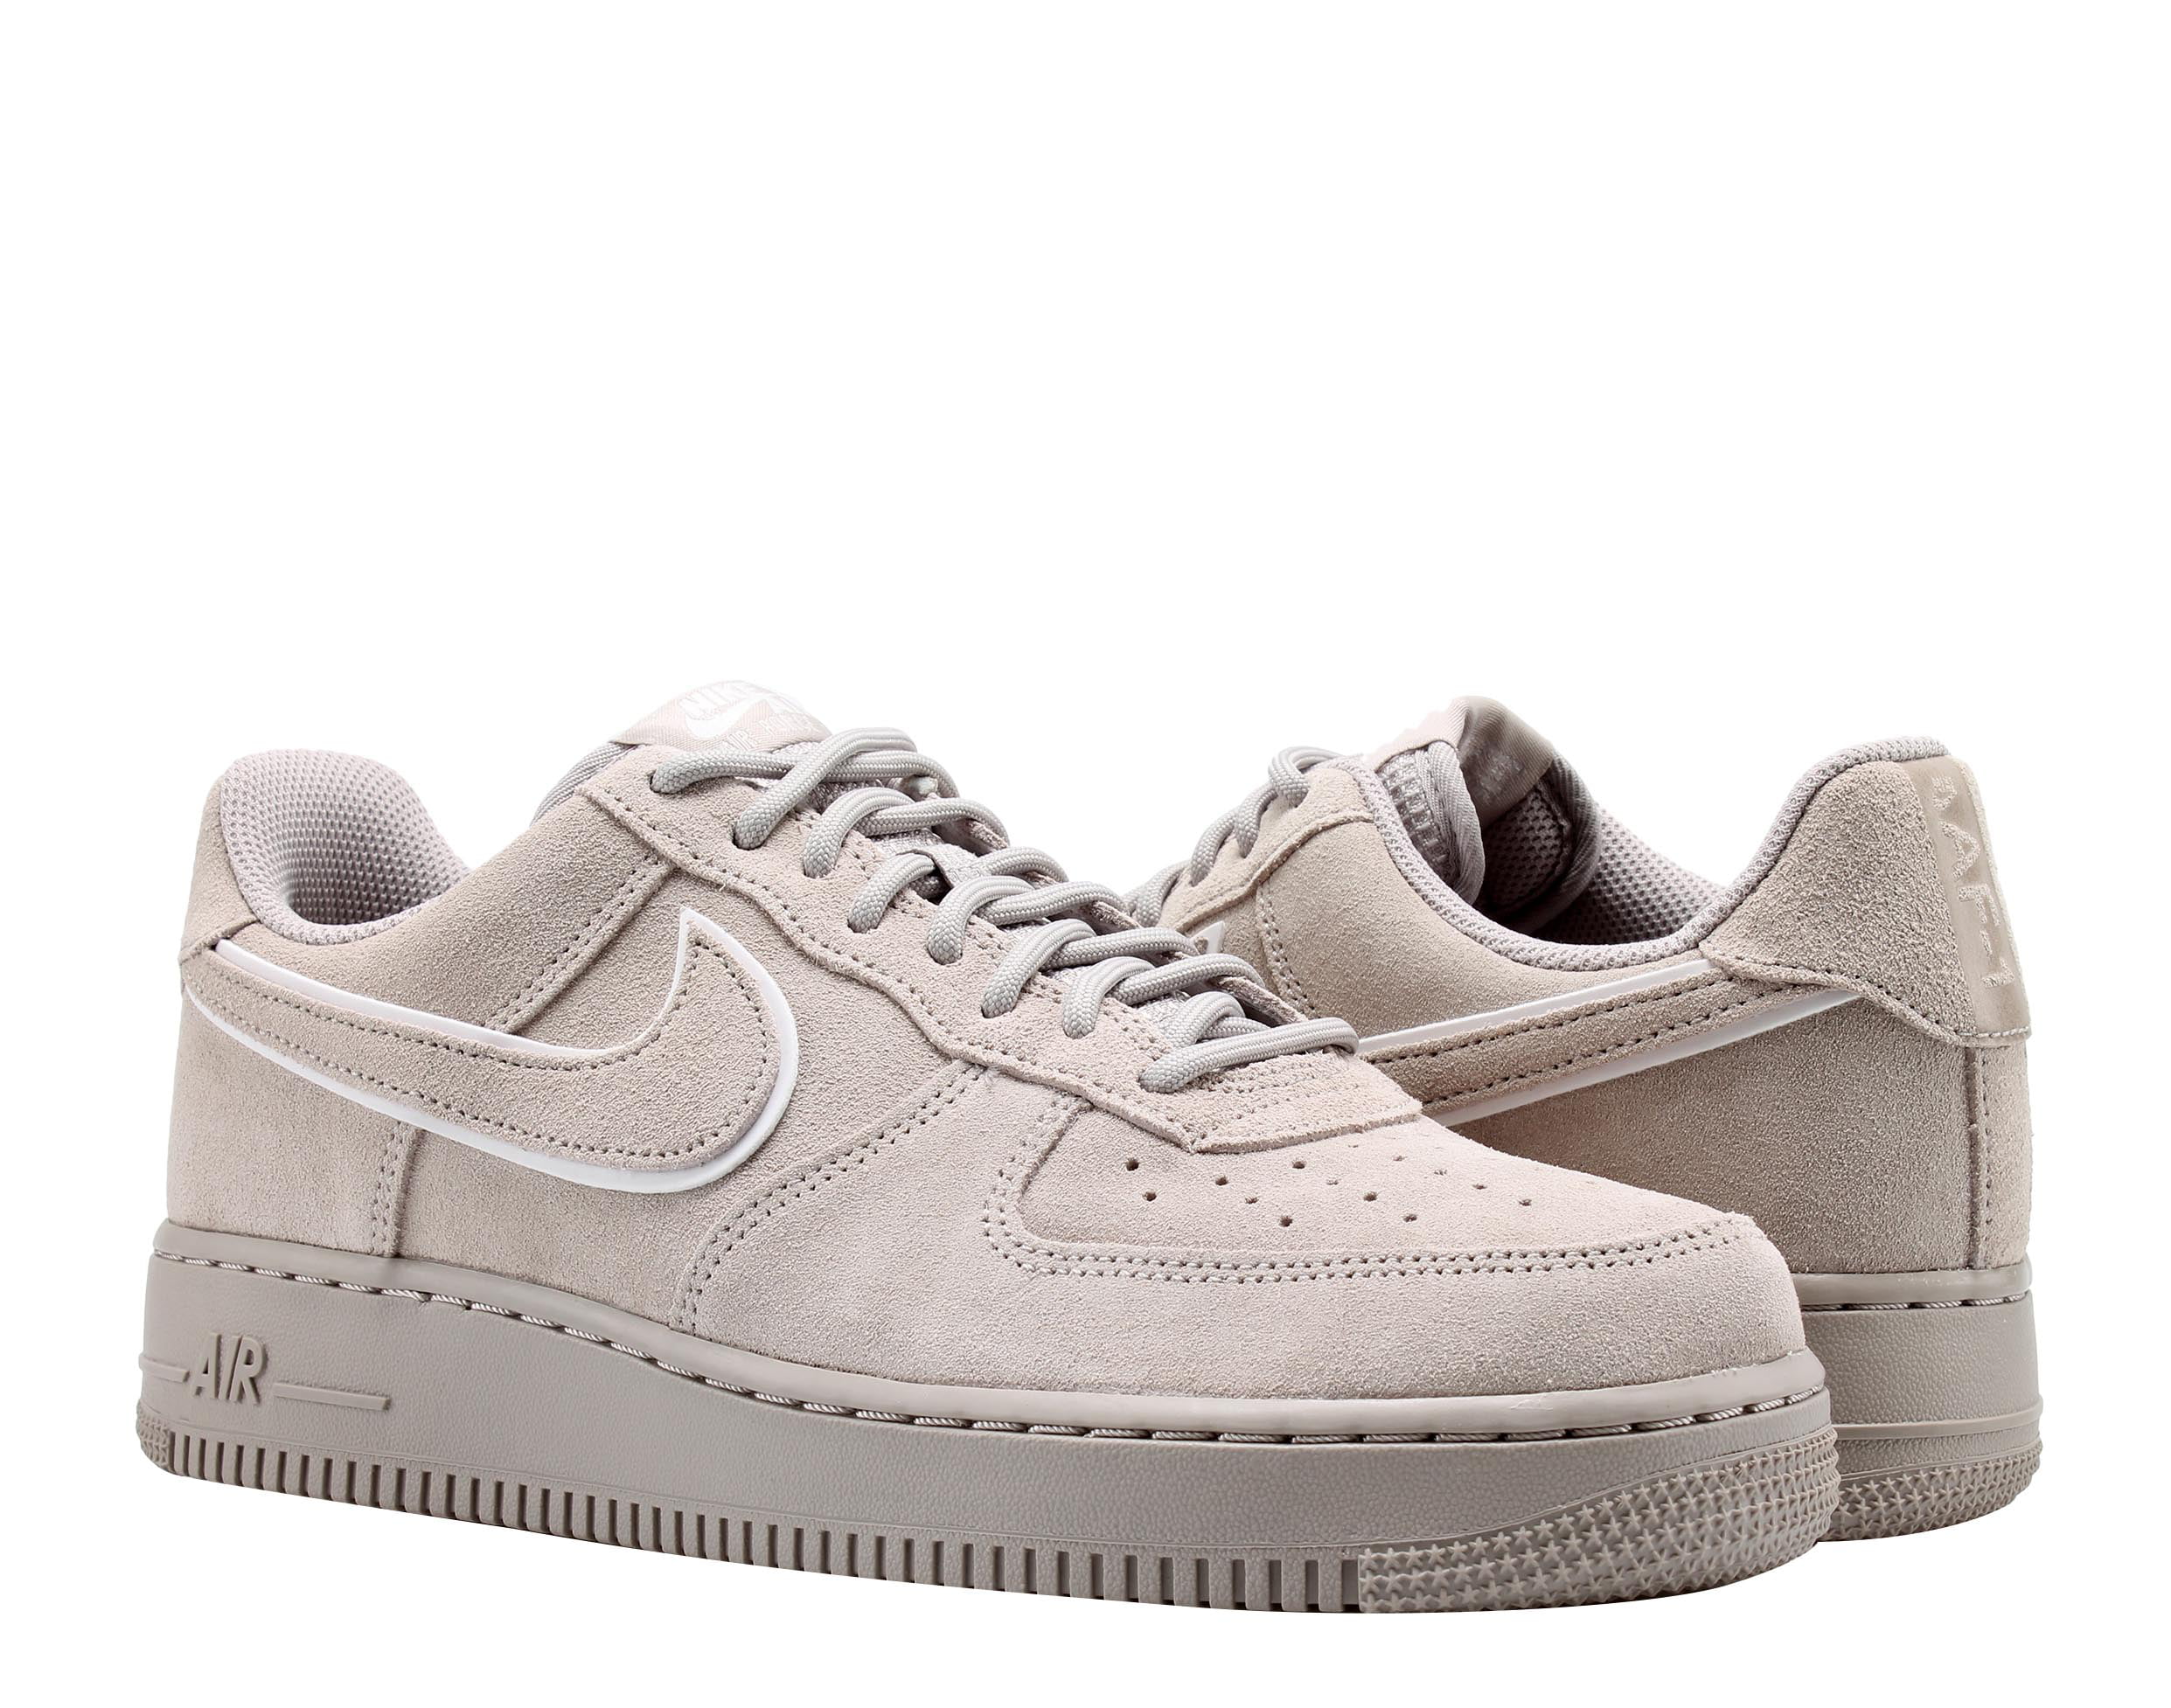 ulækkert Syd Lee Nike Air Force 1 '07 LV8 Suede Men's Running Shoes Moon Particle/Moon  Particle aa1117-201 - Walmart.com